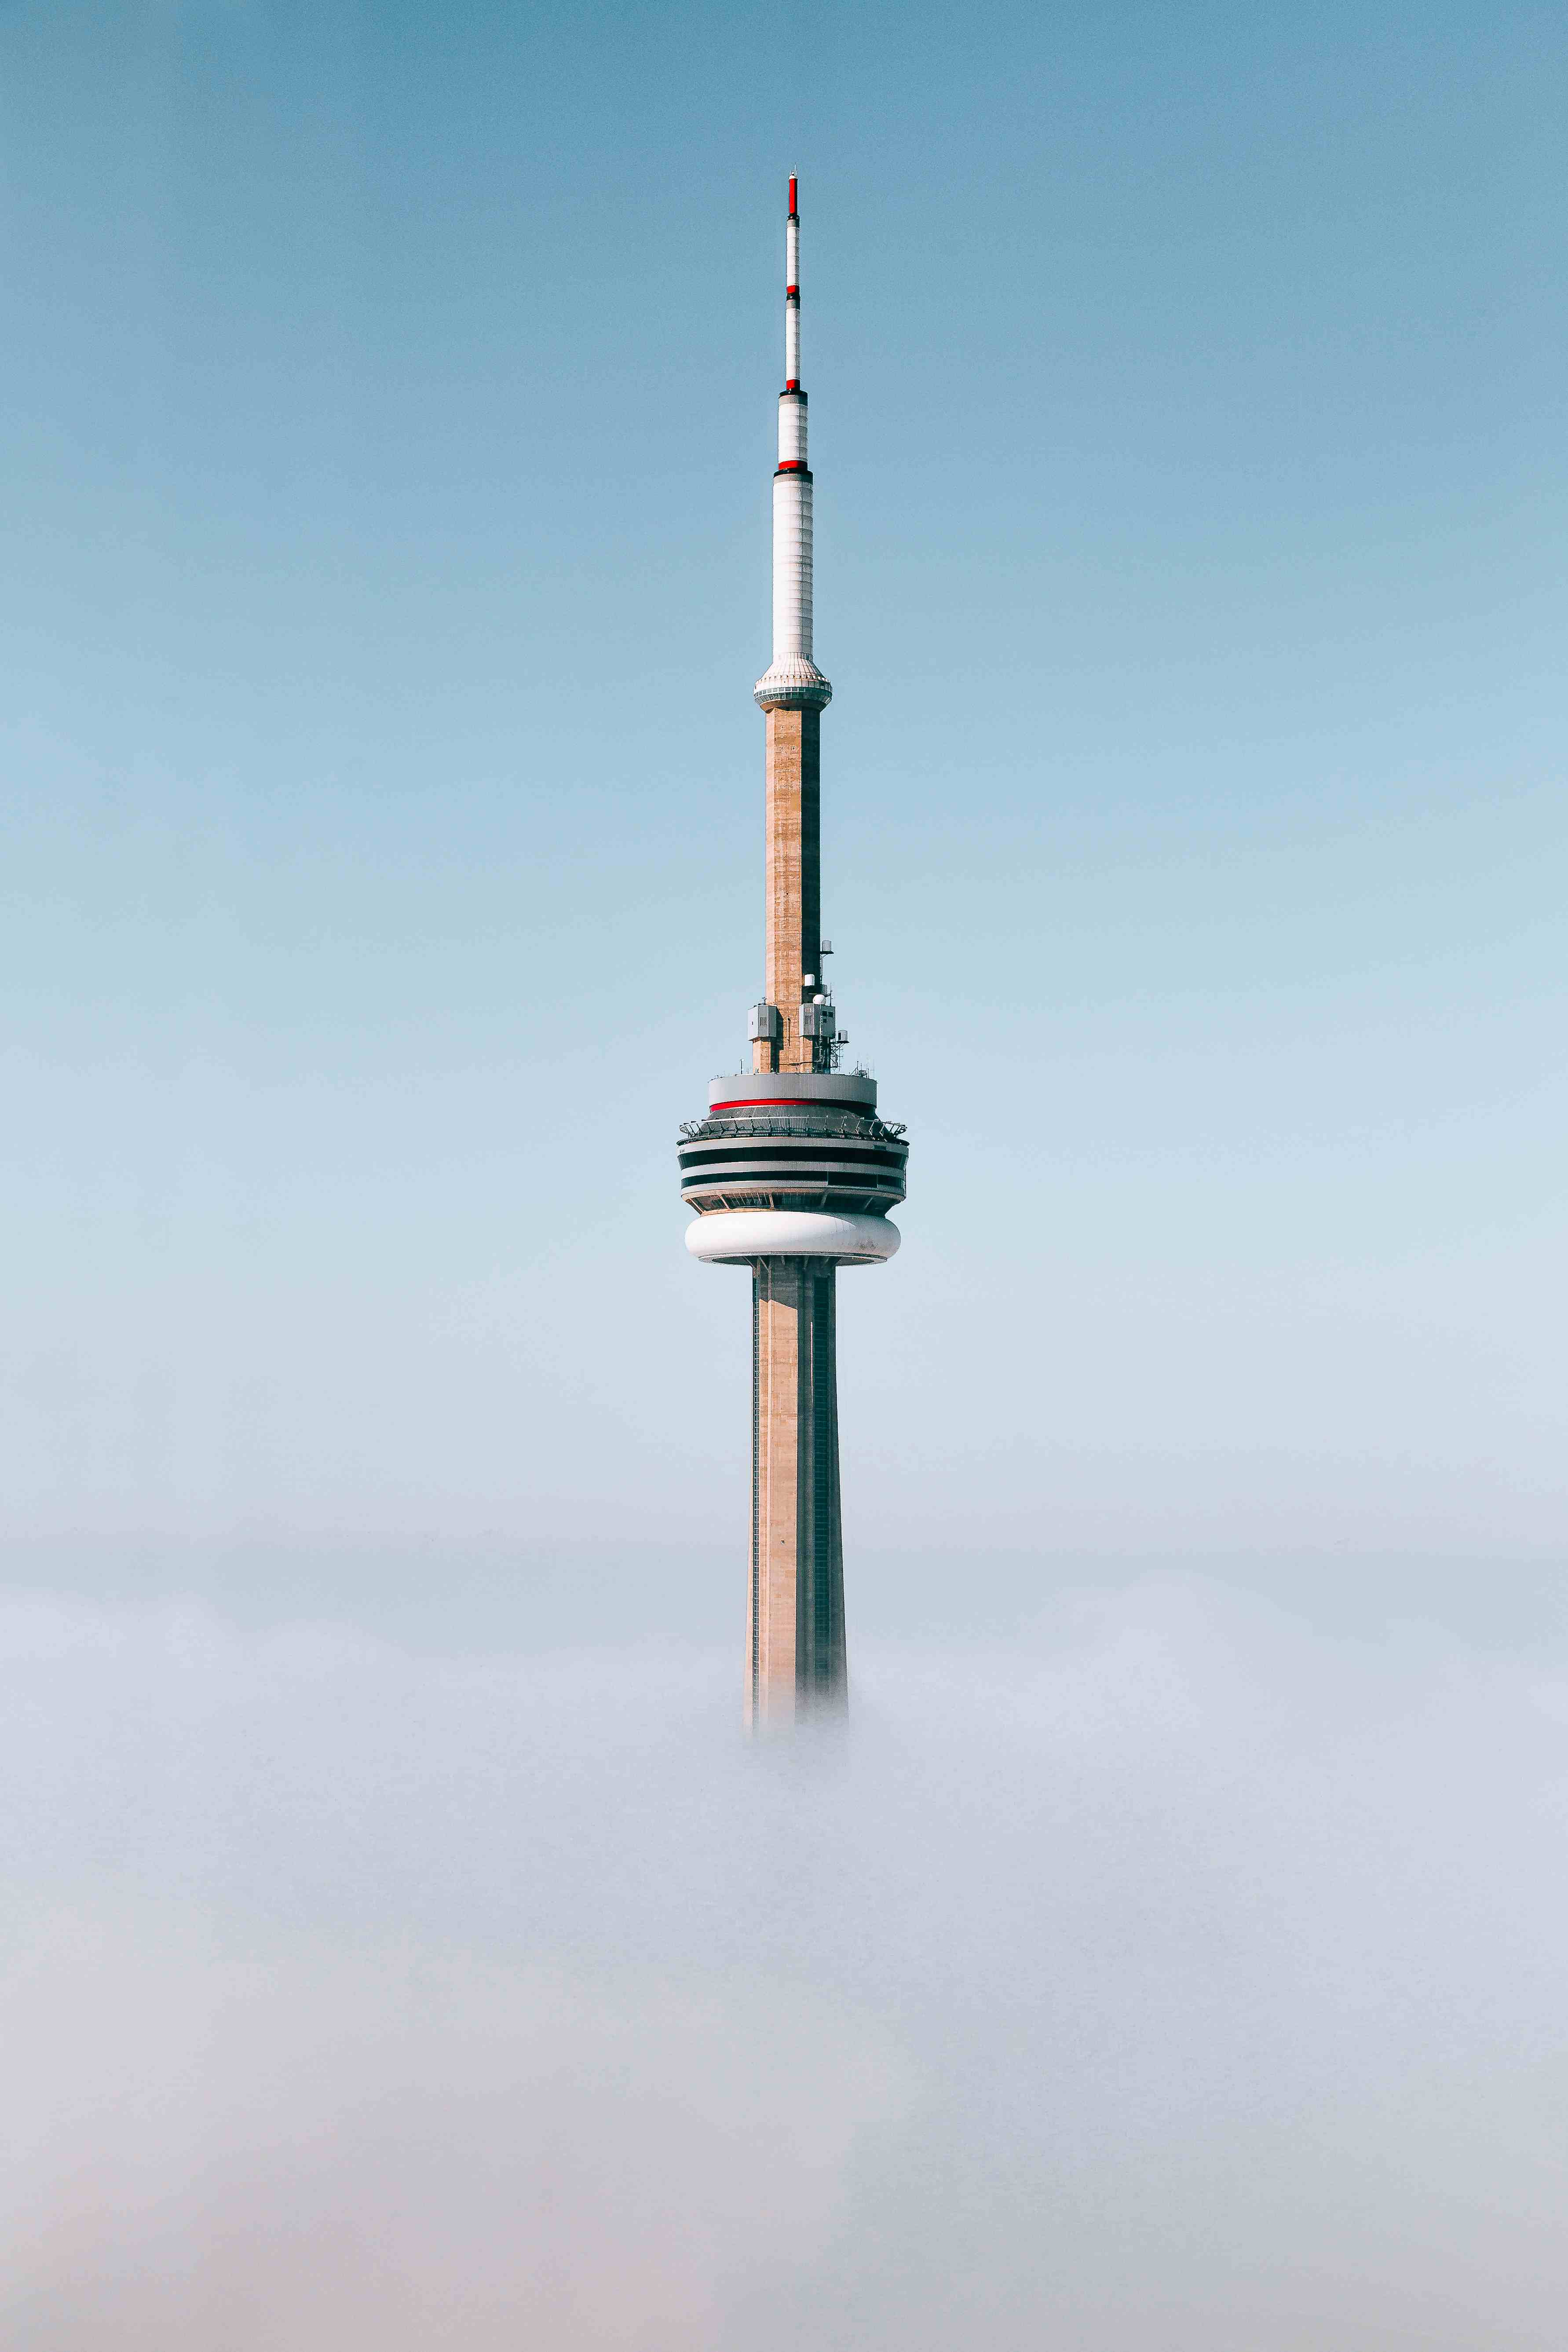 A photo of the top of half of the CN Tower in Toronto, Canada, standing tall above the clouds with a blue sky